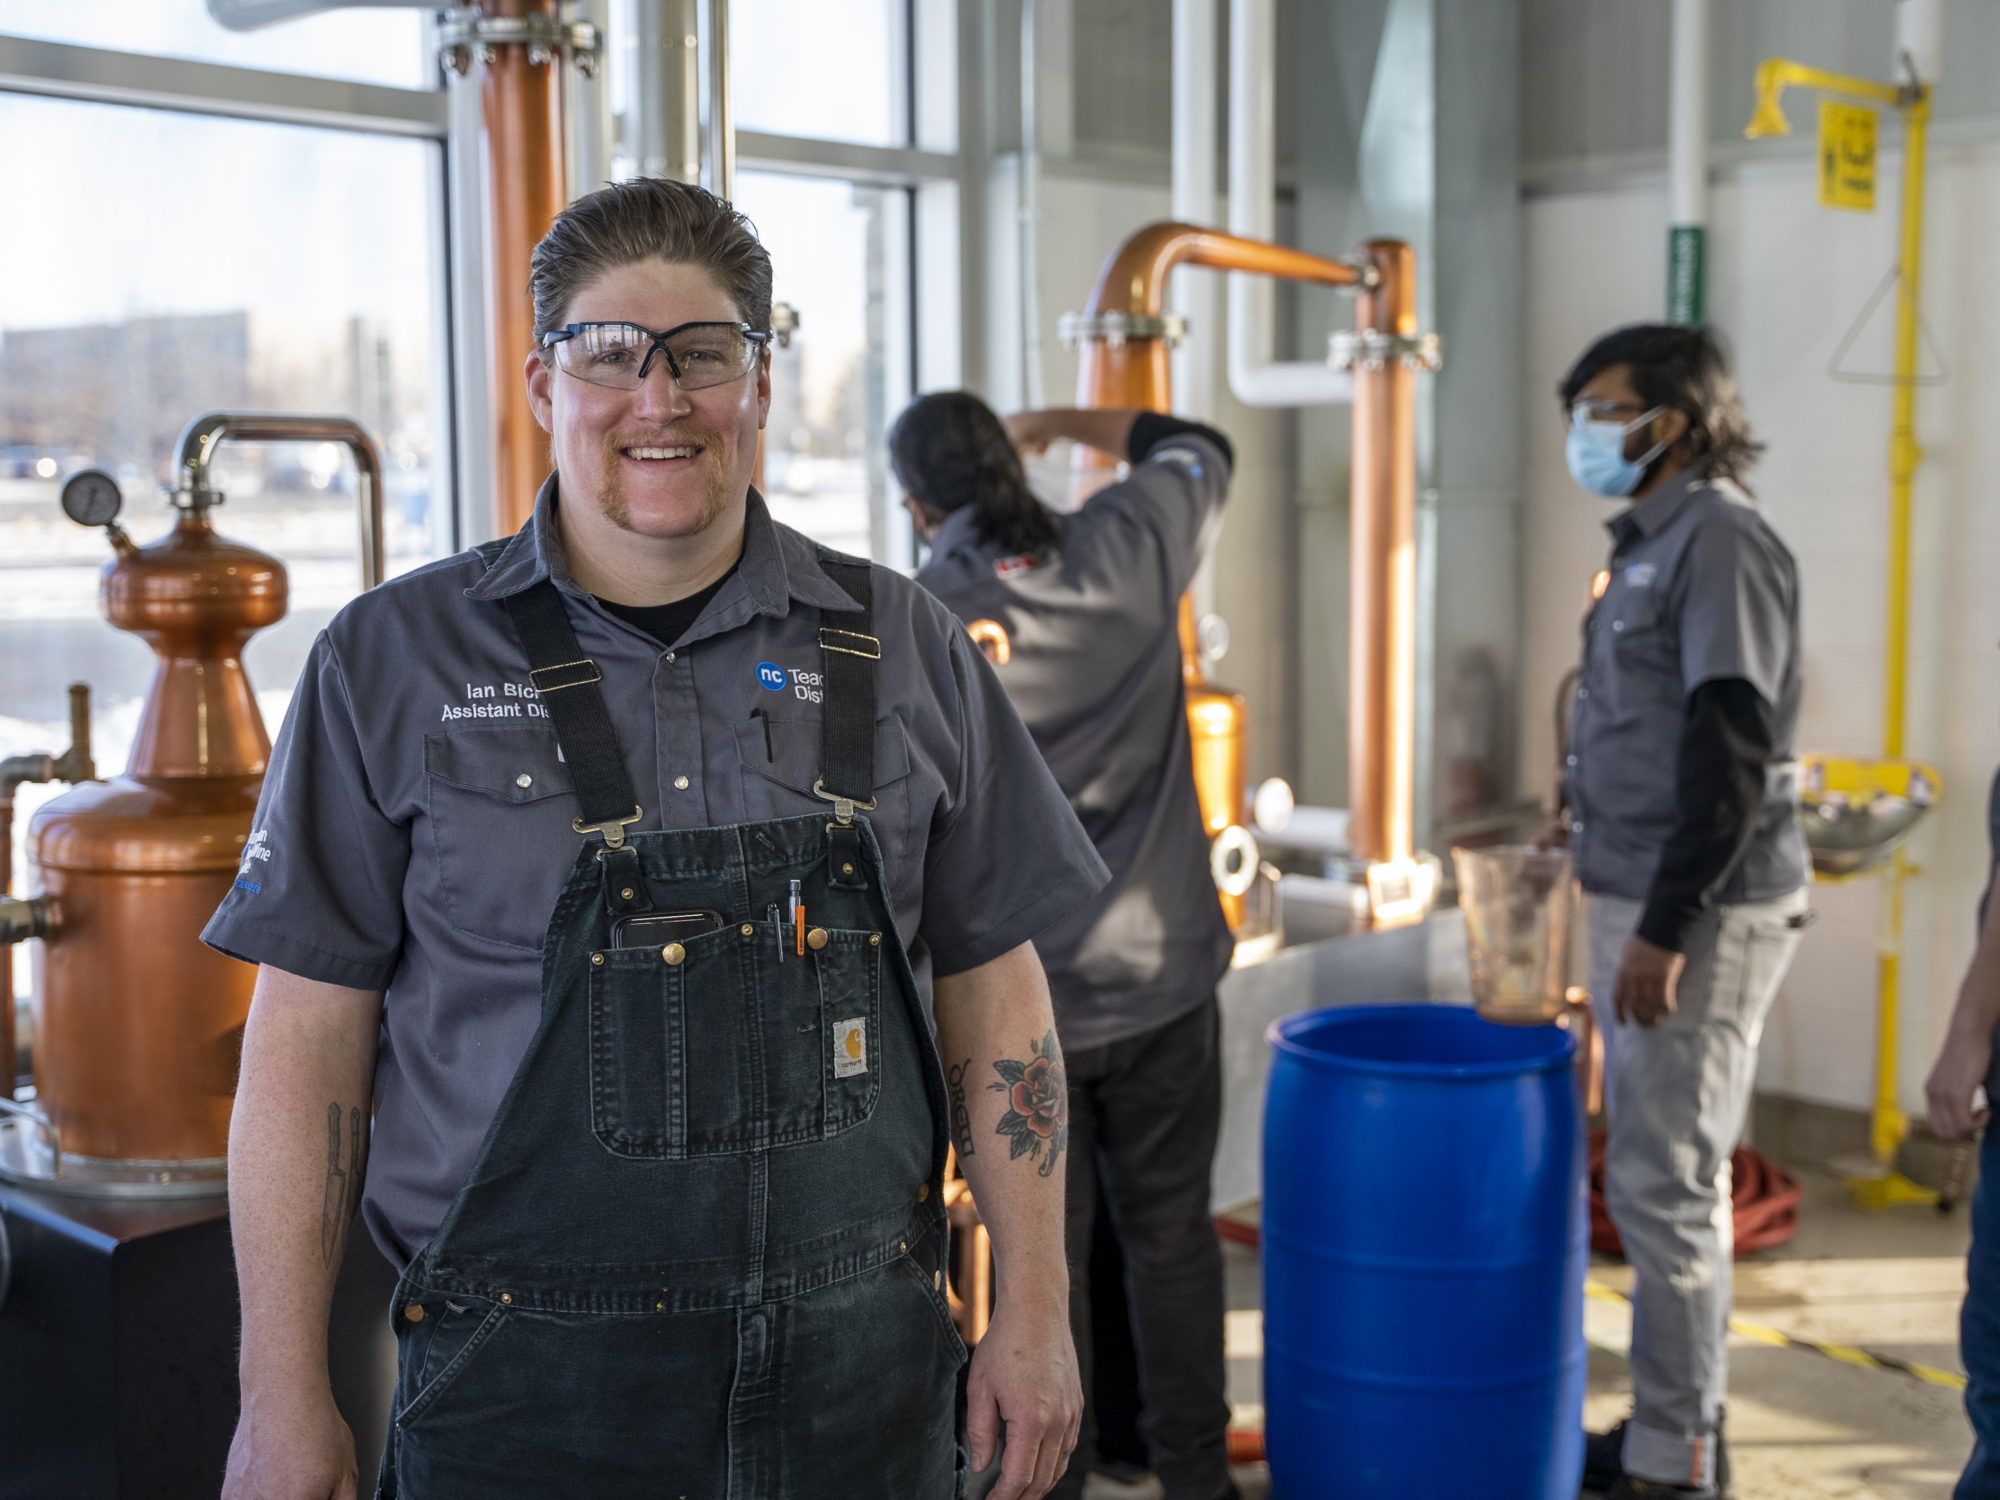 A man in overalls and safety glasses stands in the foreground while two people work on distilling equipment behind him.